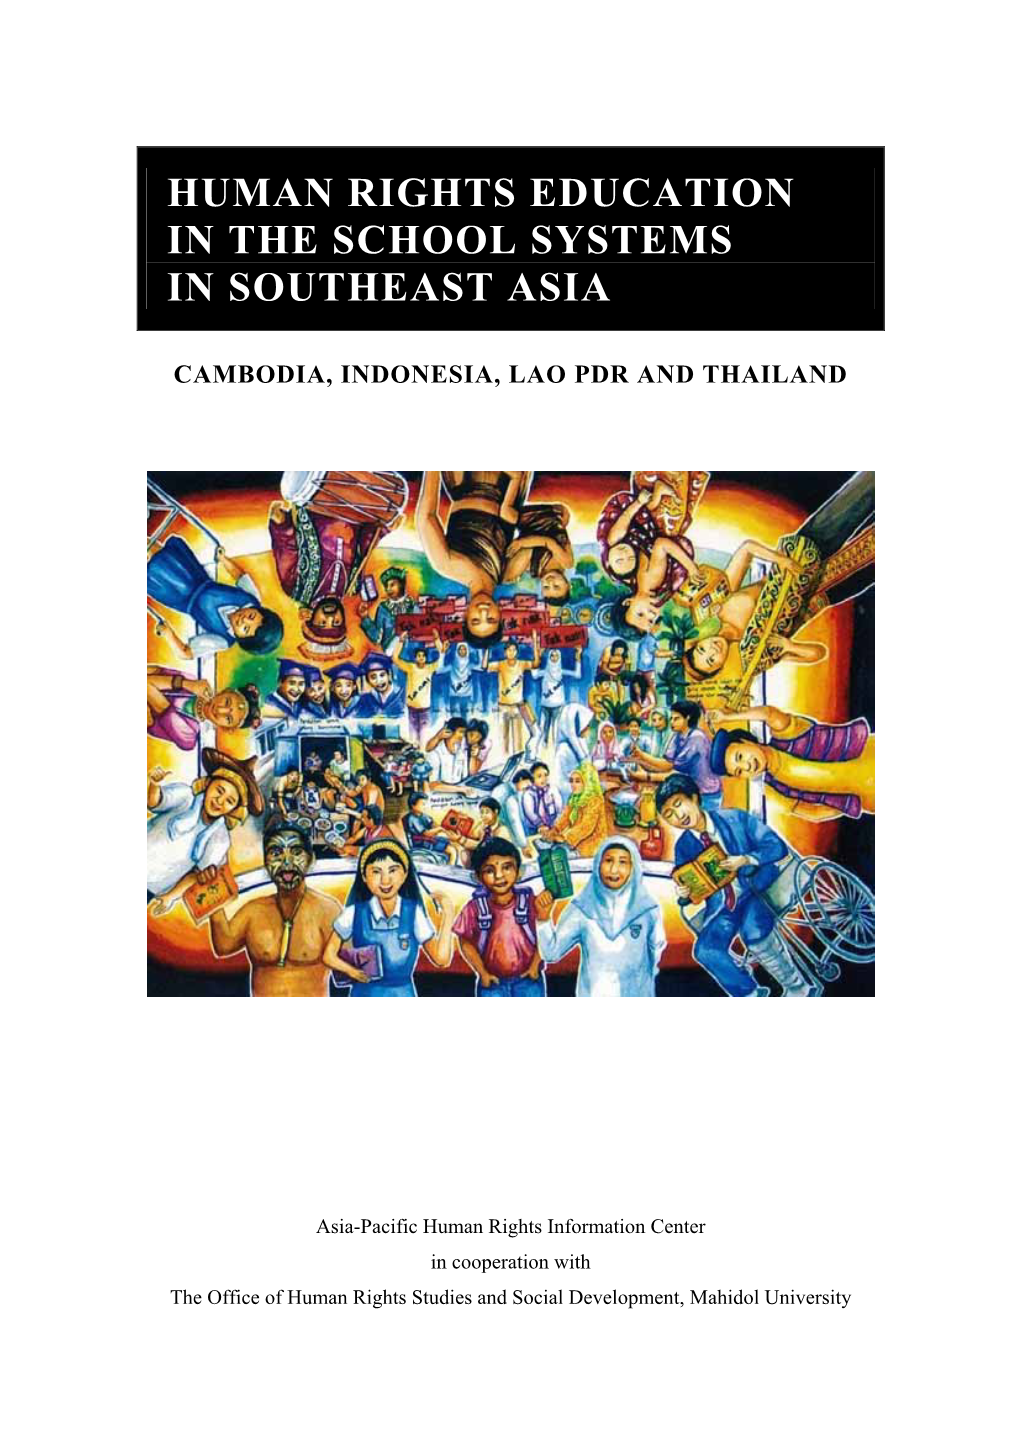 Human Rights Education in the School Systems in Southeast Asia